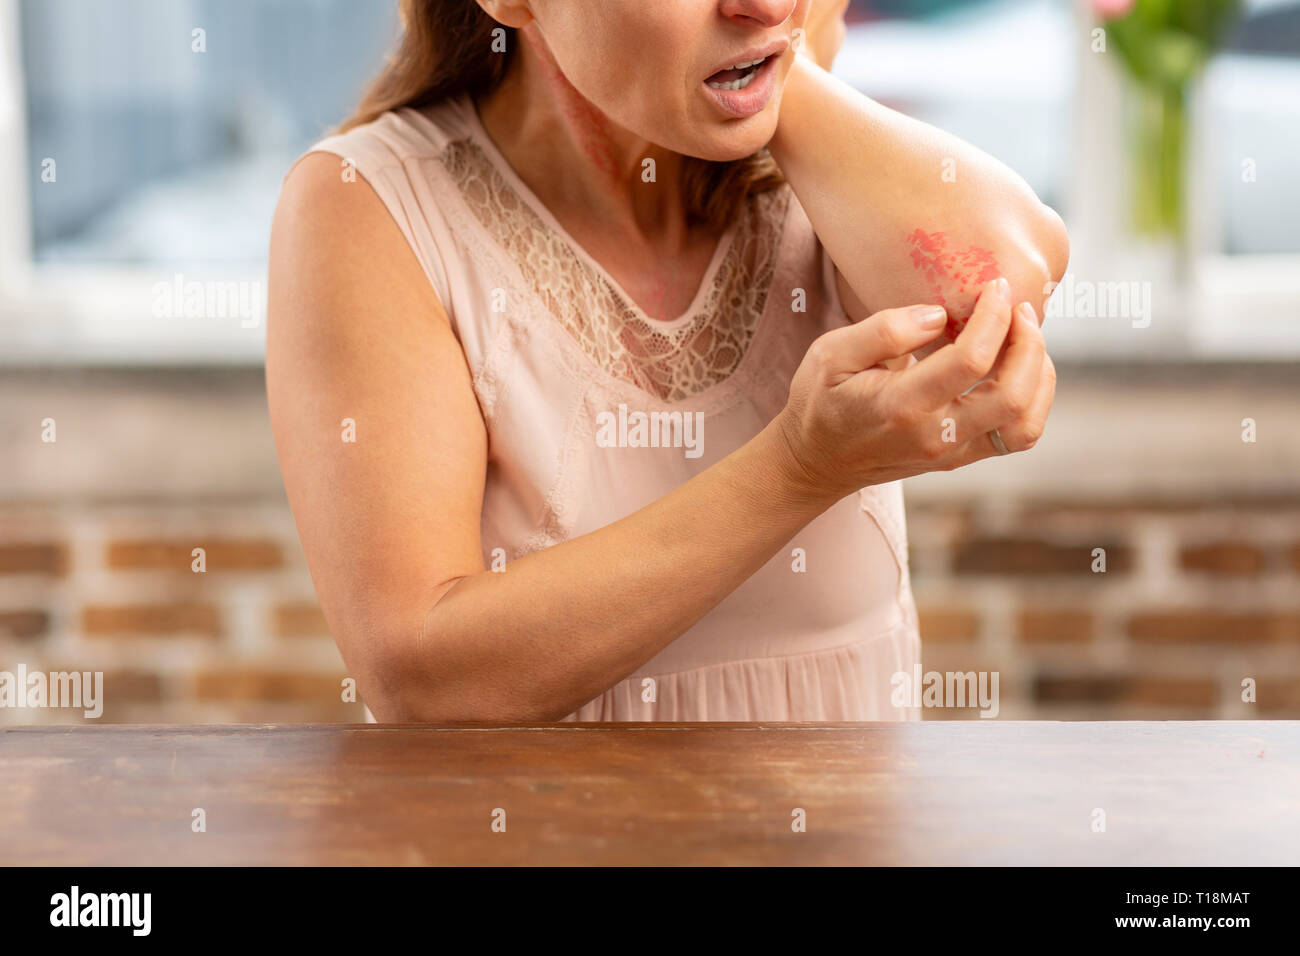 Mature housewife standing near the table and having rash on elbow Stock Photo